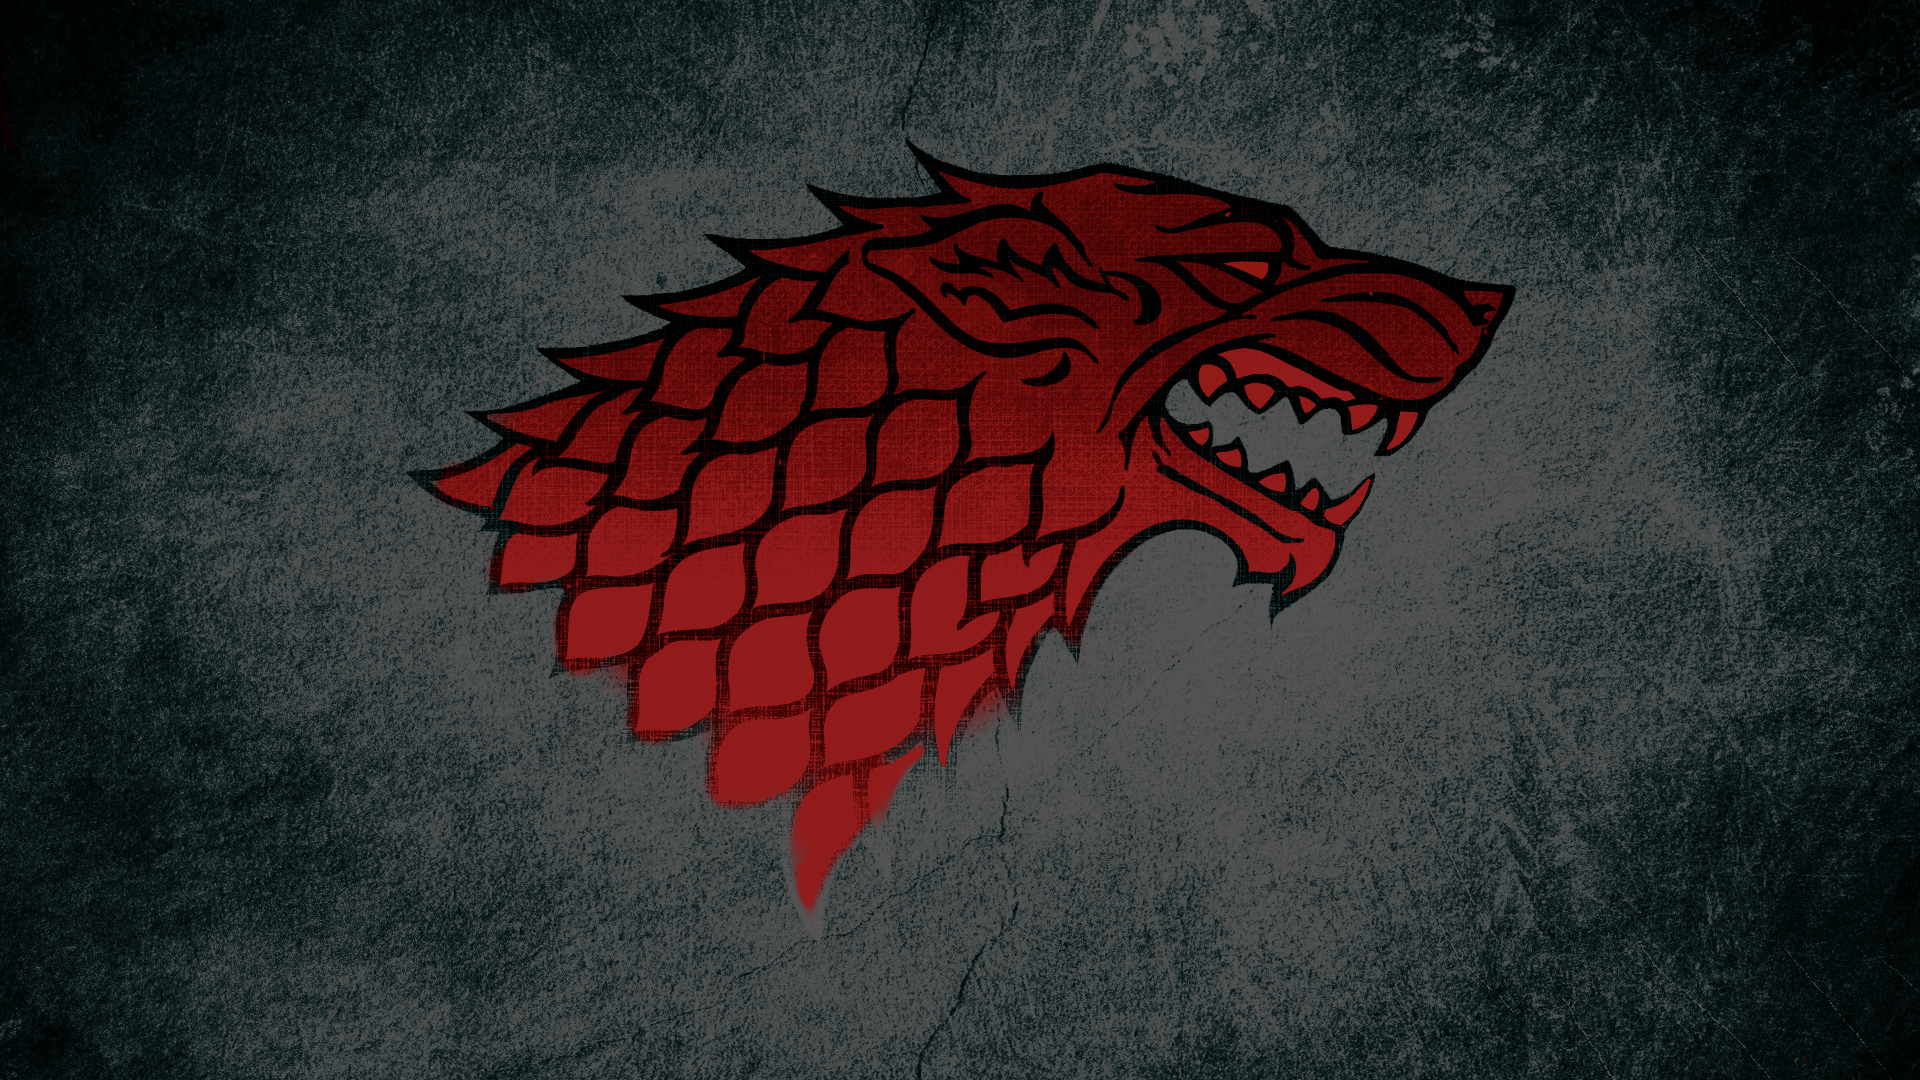 Wallpaper : illustration, logo, Game of Thrones, House Stark, Winter Is  Coming, brand, black and white, monochrome photography 1920x1080 - tomas692  - 178655 - HD Wallpapers - WallHere